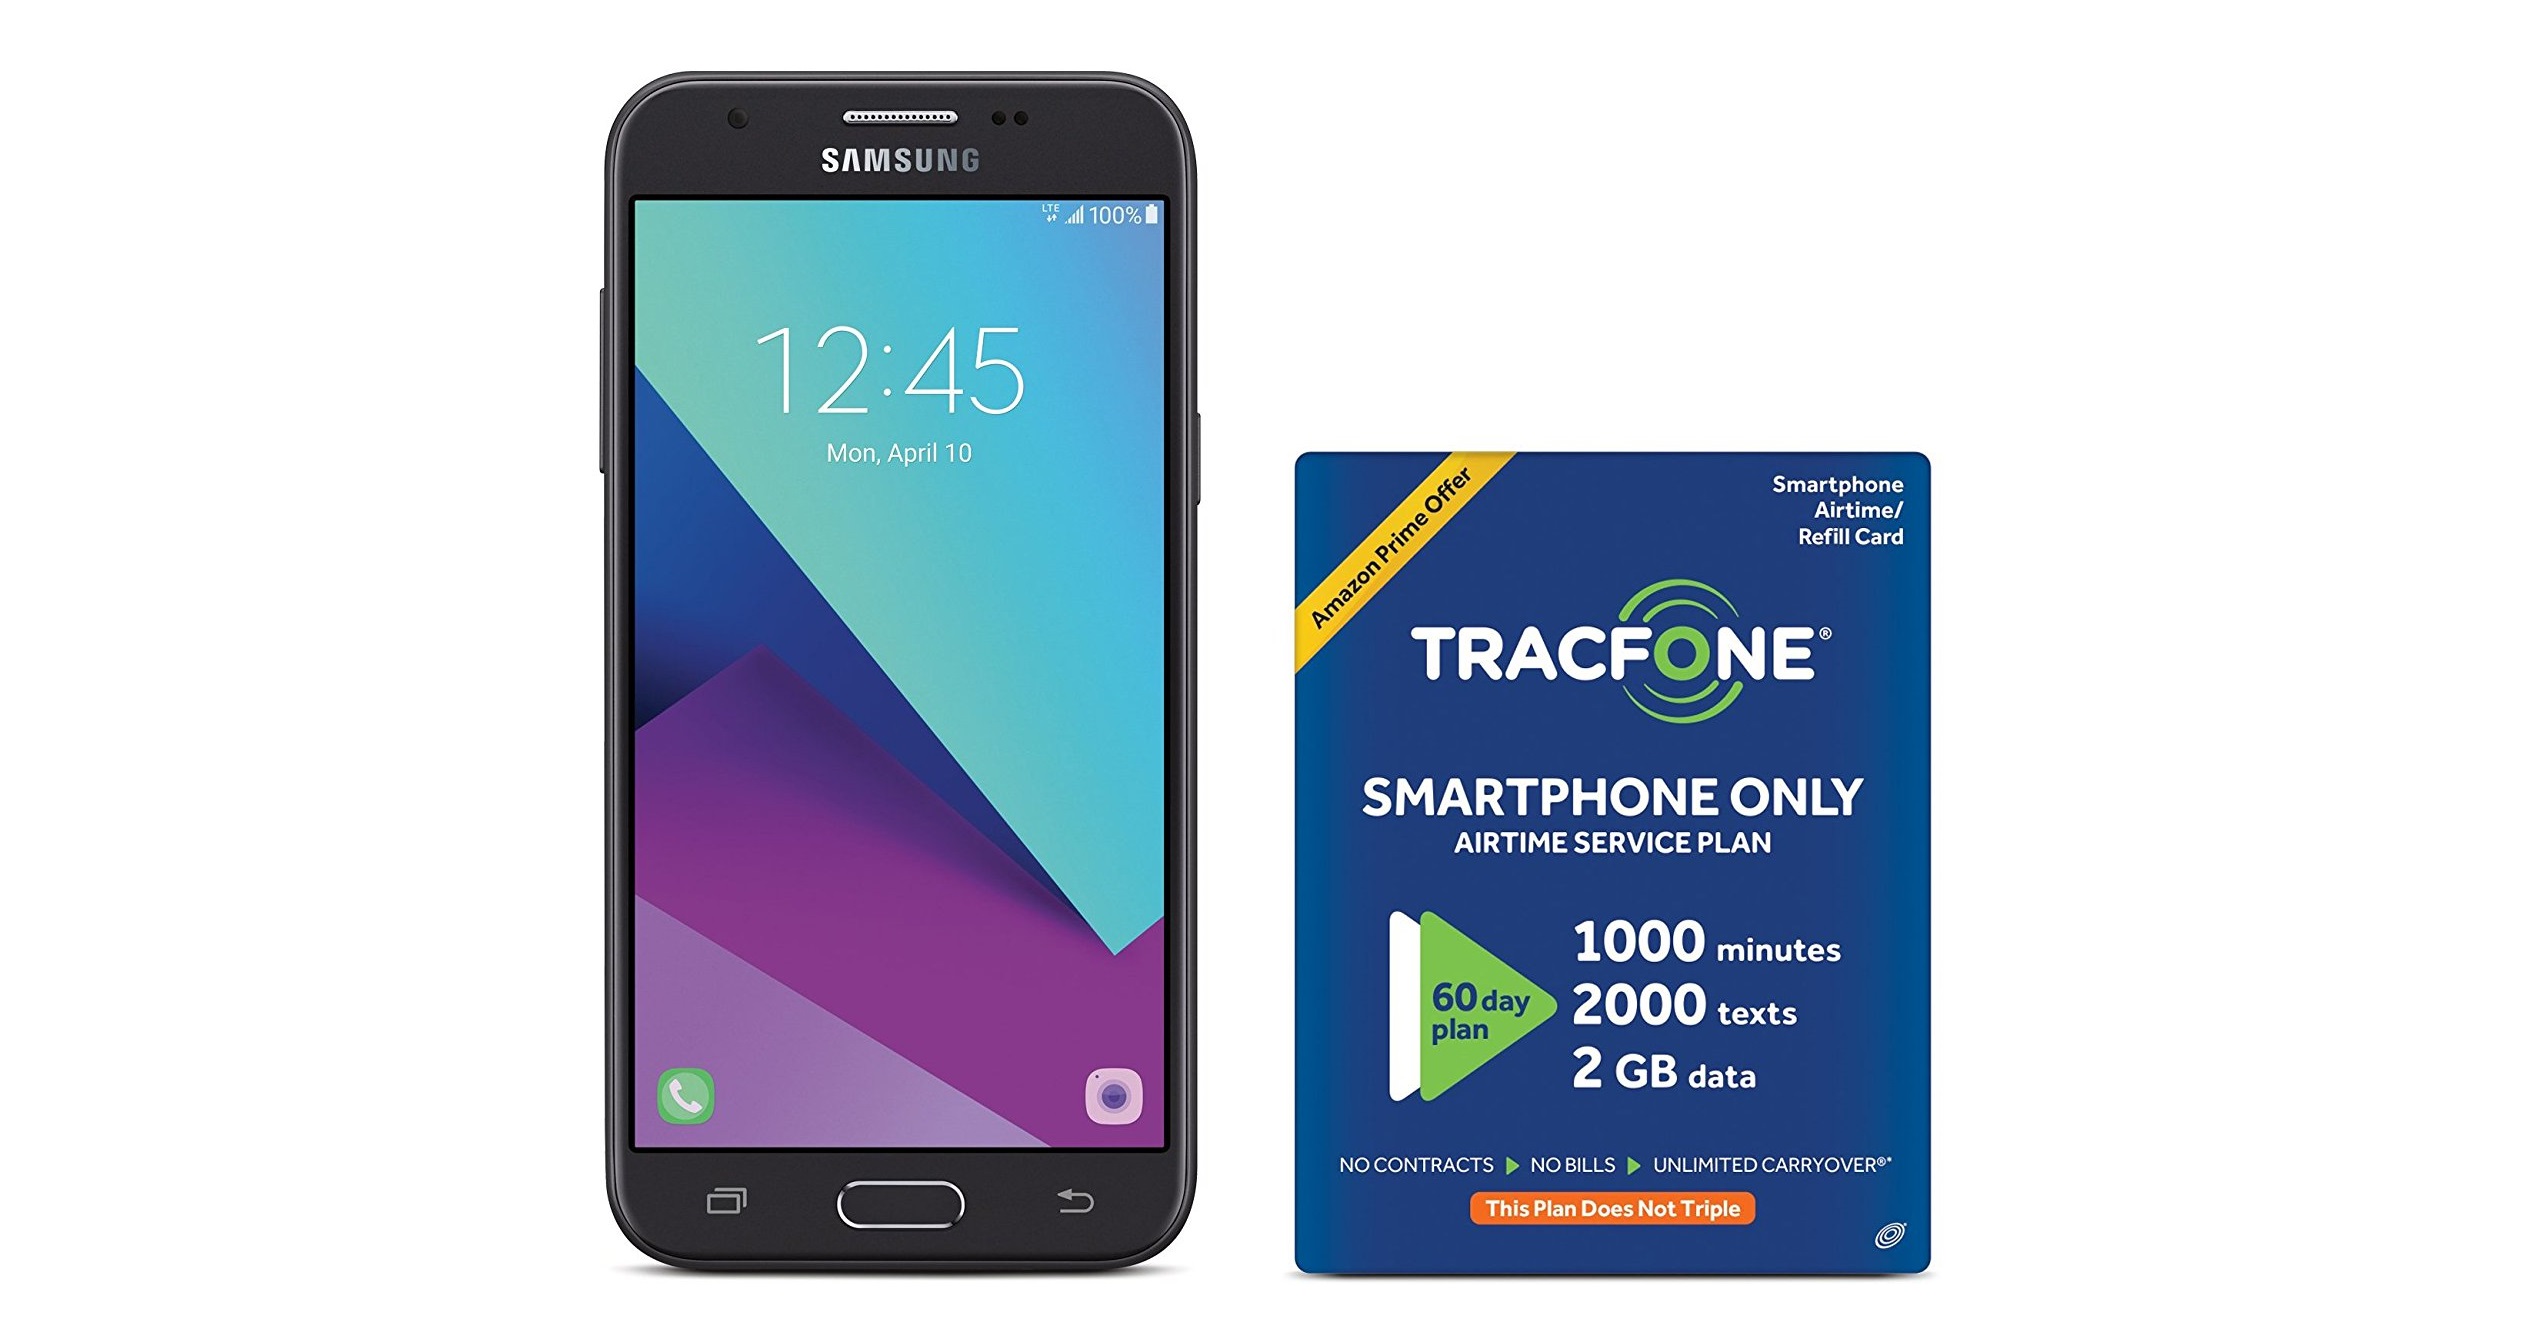 TracFone Samsung Galaxy J3 Luna Pro 4G LTE Prepaid Smartphone with Amazon Exclusive Free $40 Airtime Bundle